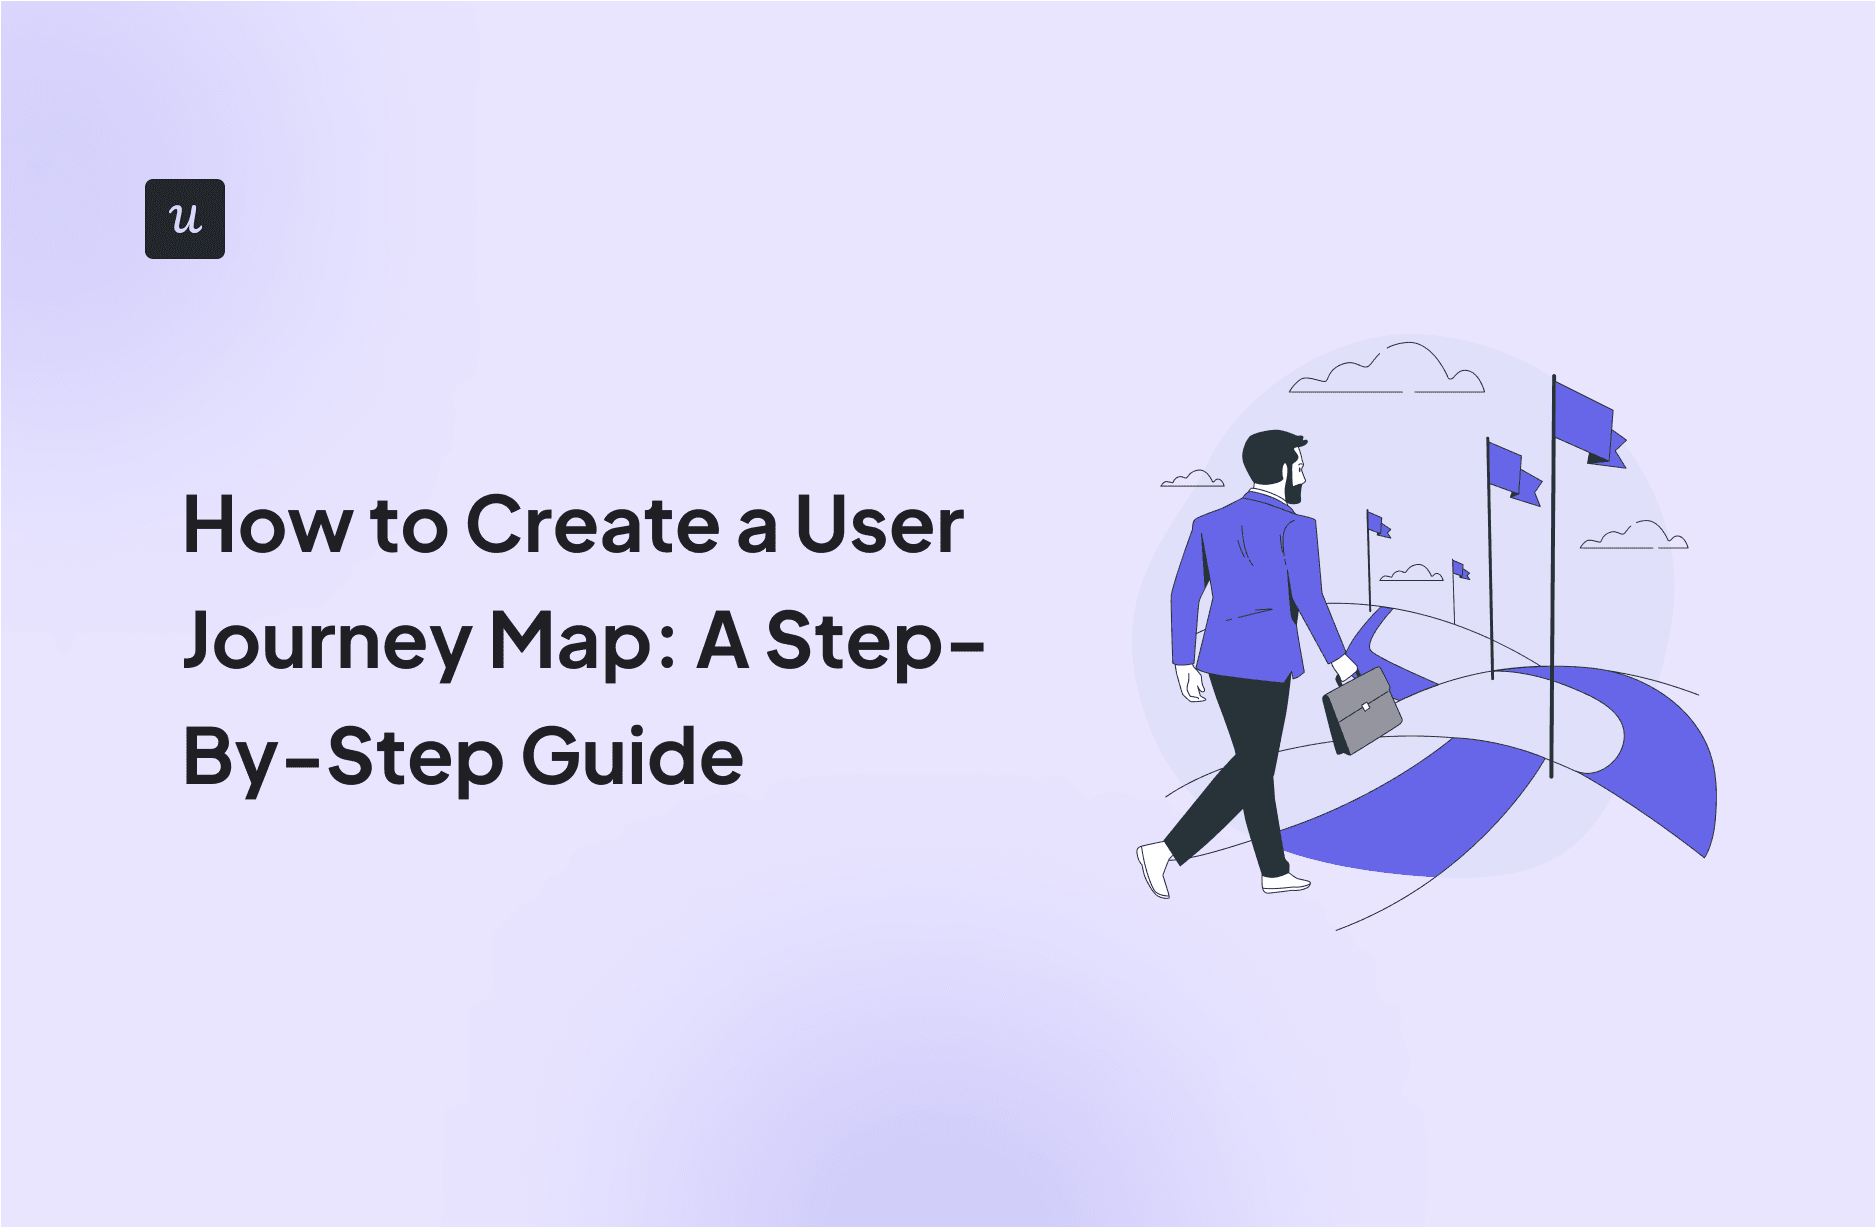 How to Create a User Journey Map: A Step-By-Step Guide cover